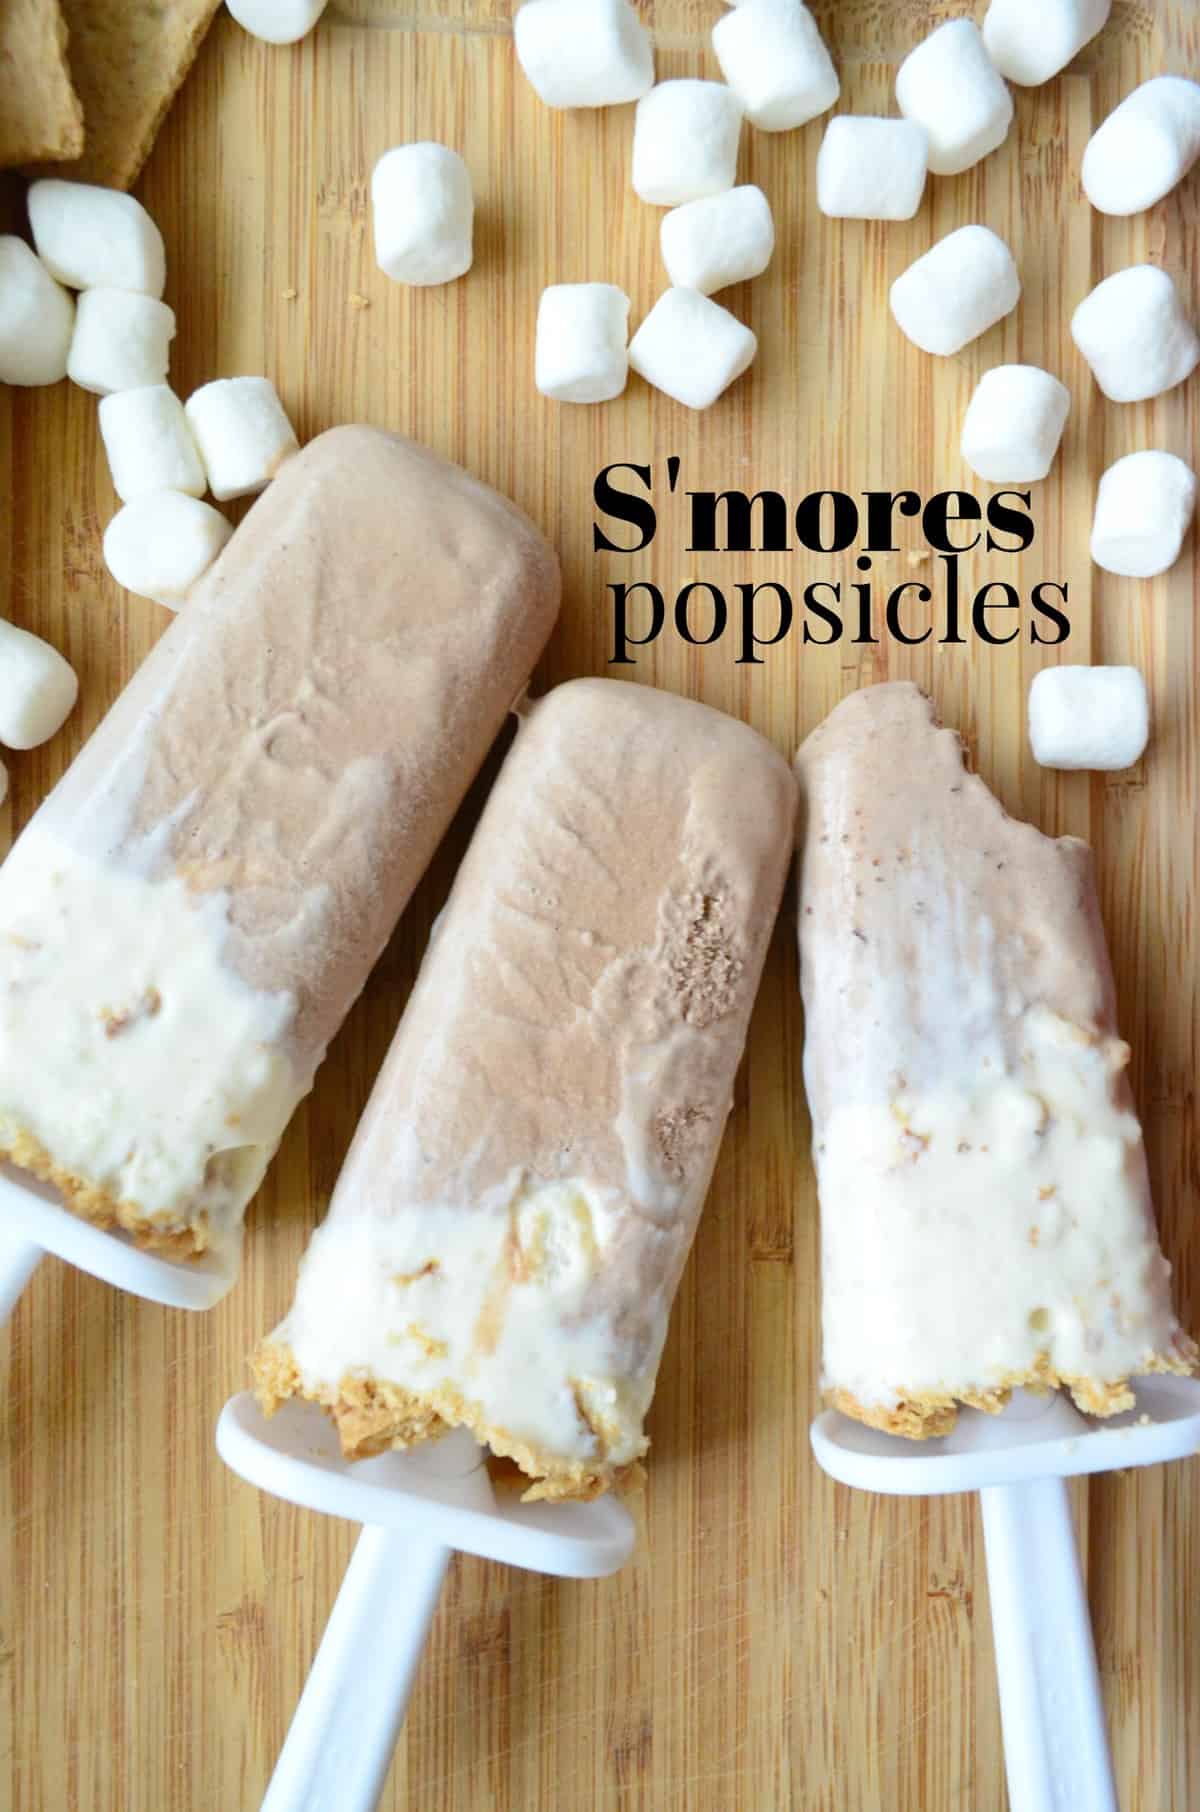 3 S'mores Popsicles arranged decoratively amongst mini marshmallows on board with pinterest title text..